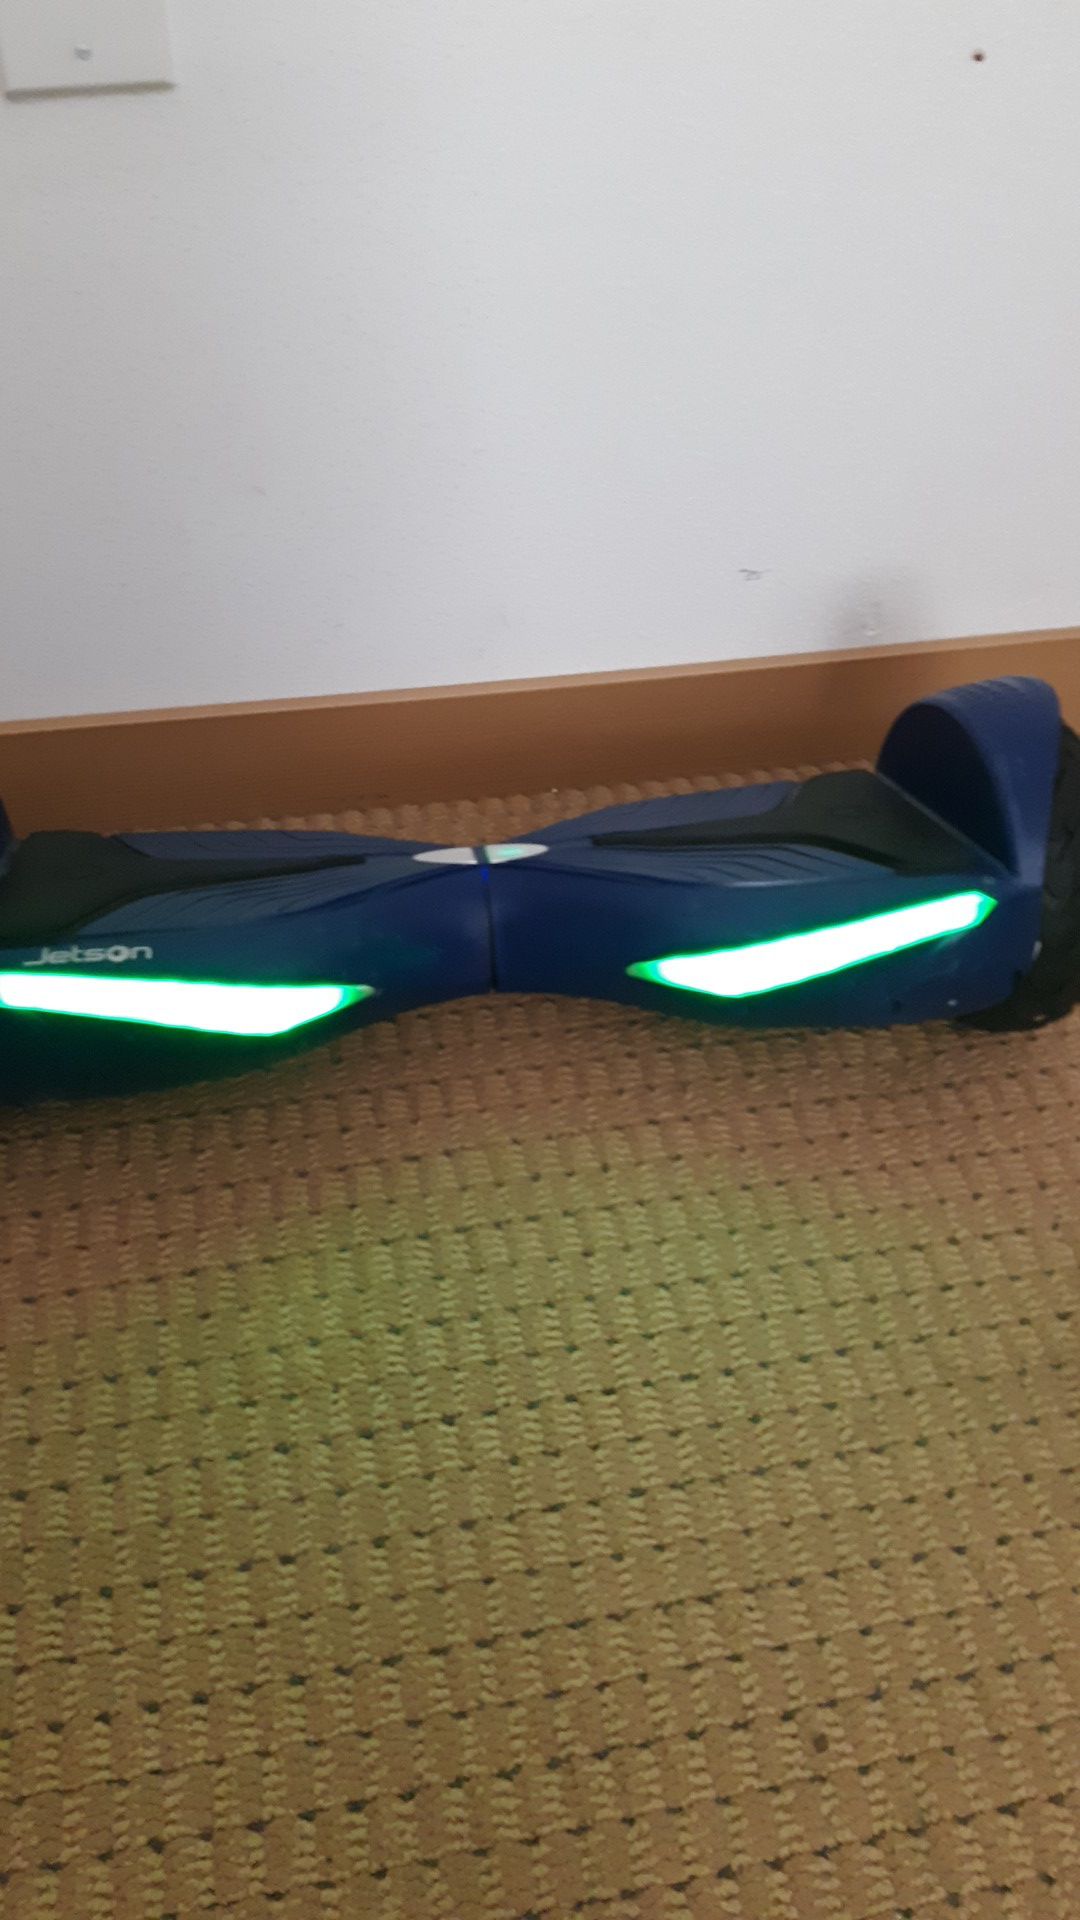 Jetson hoverboard